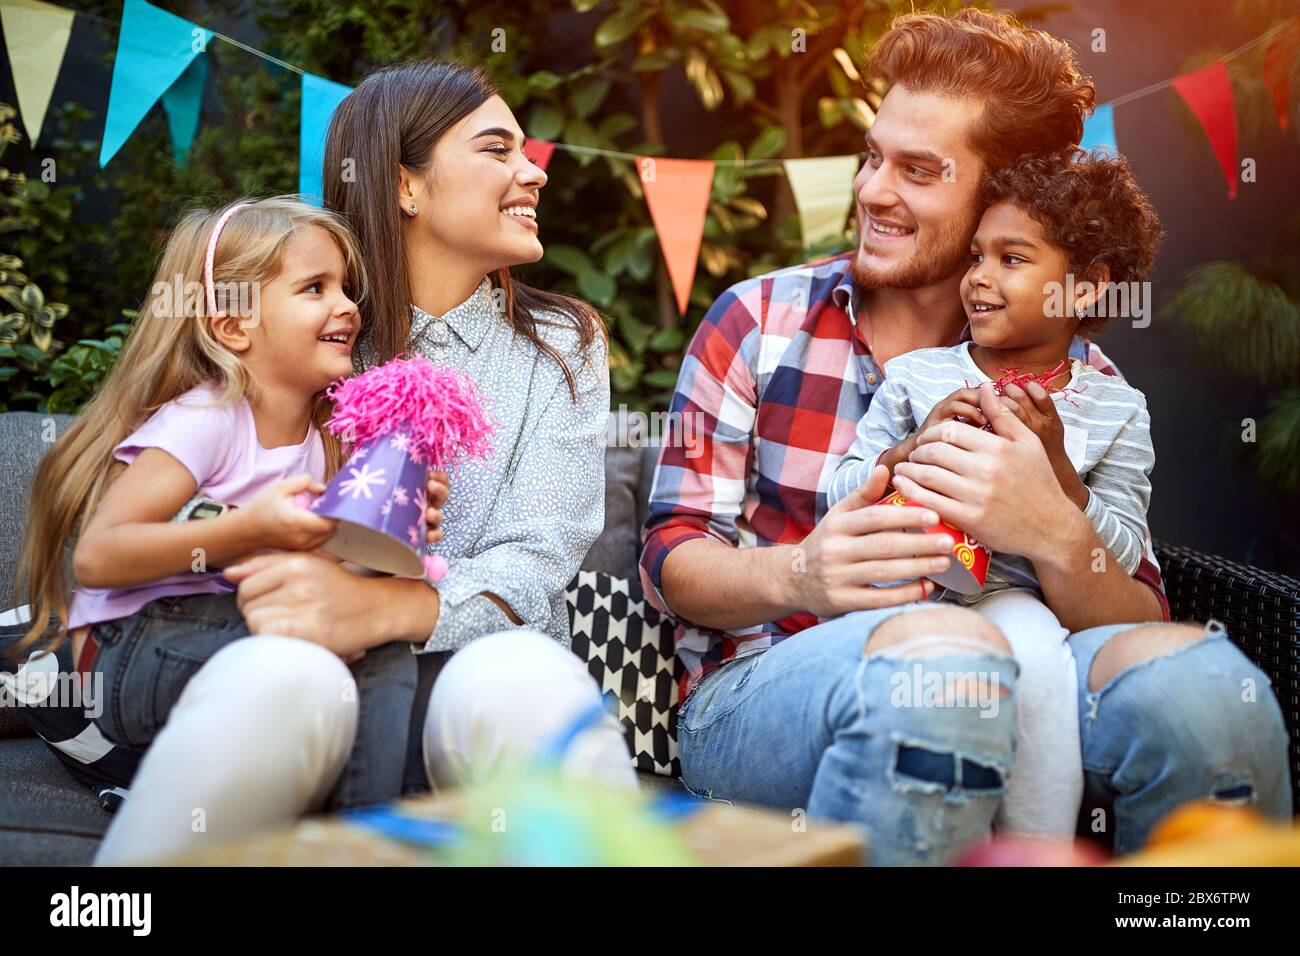 Cheerful man and woman with children on birthday party having fun and smiling Stock Photo